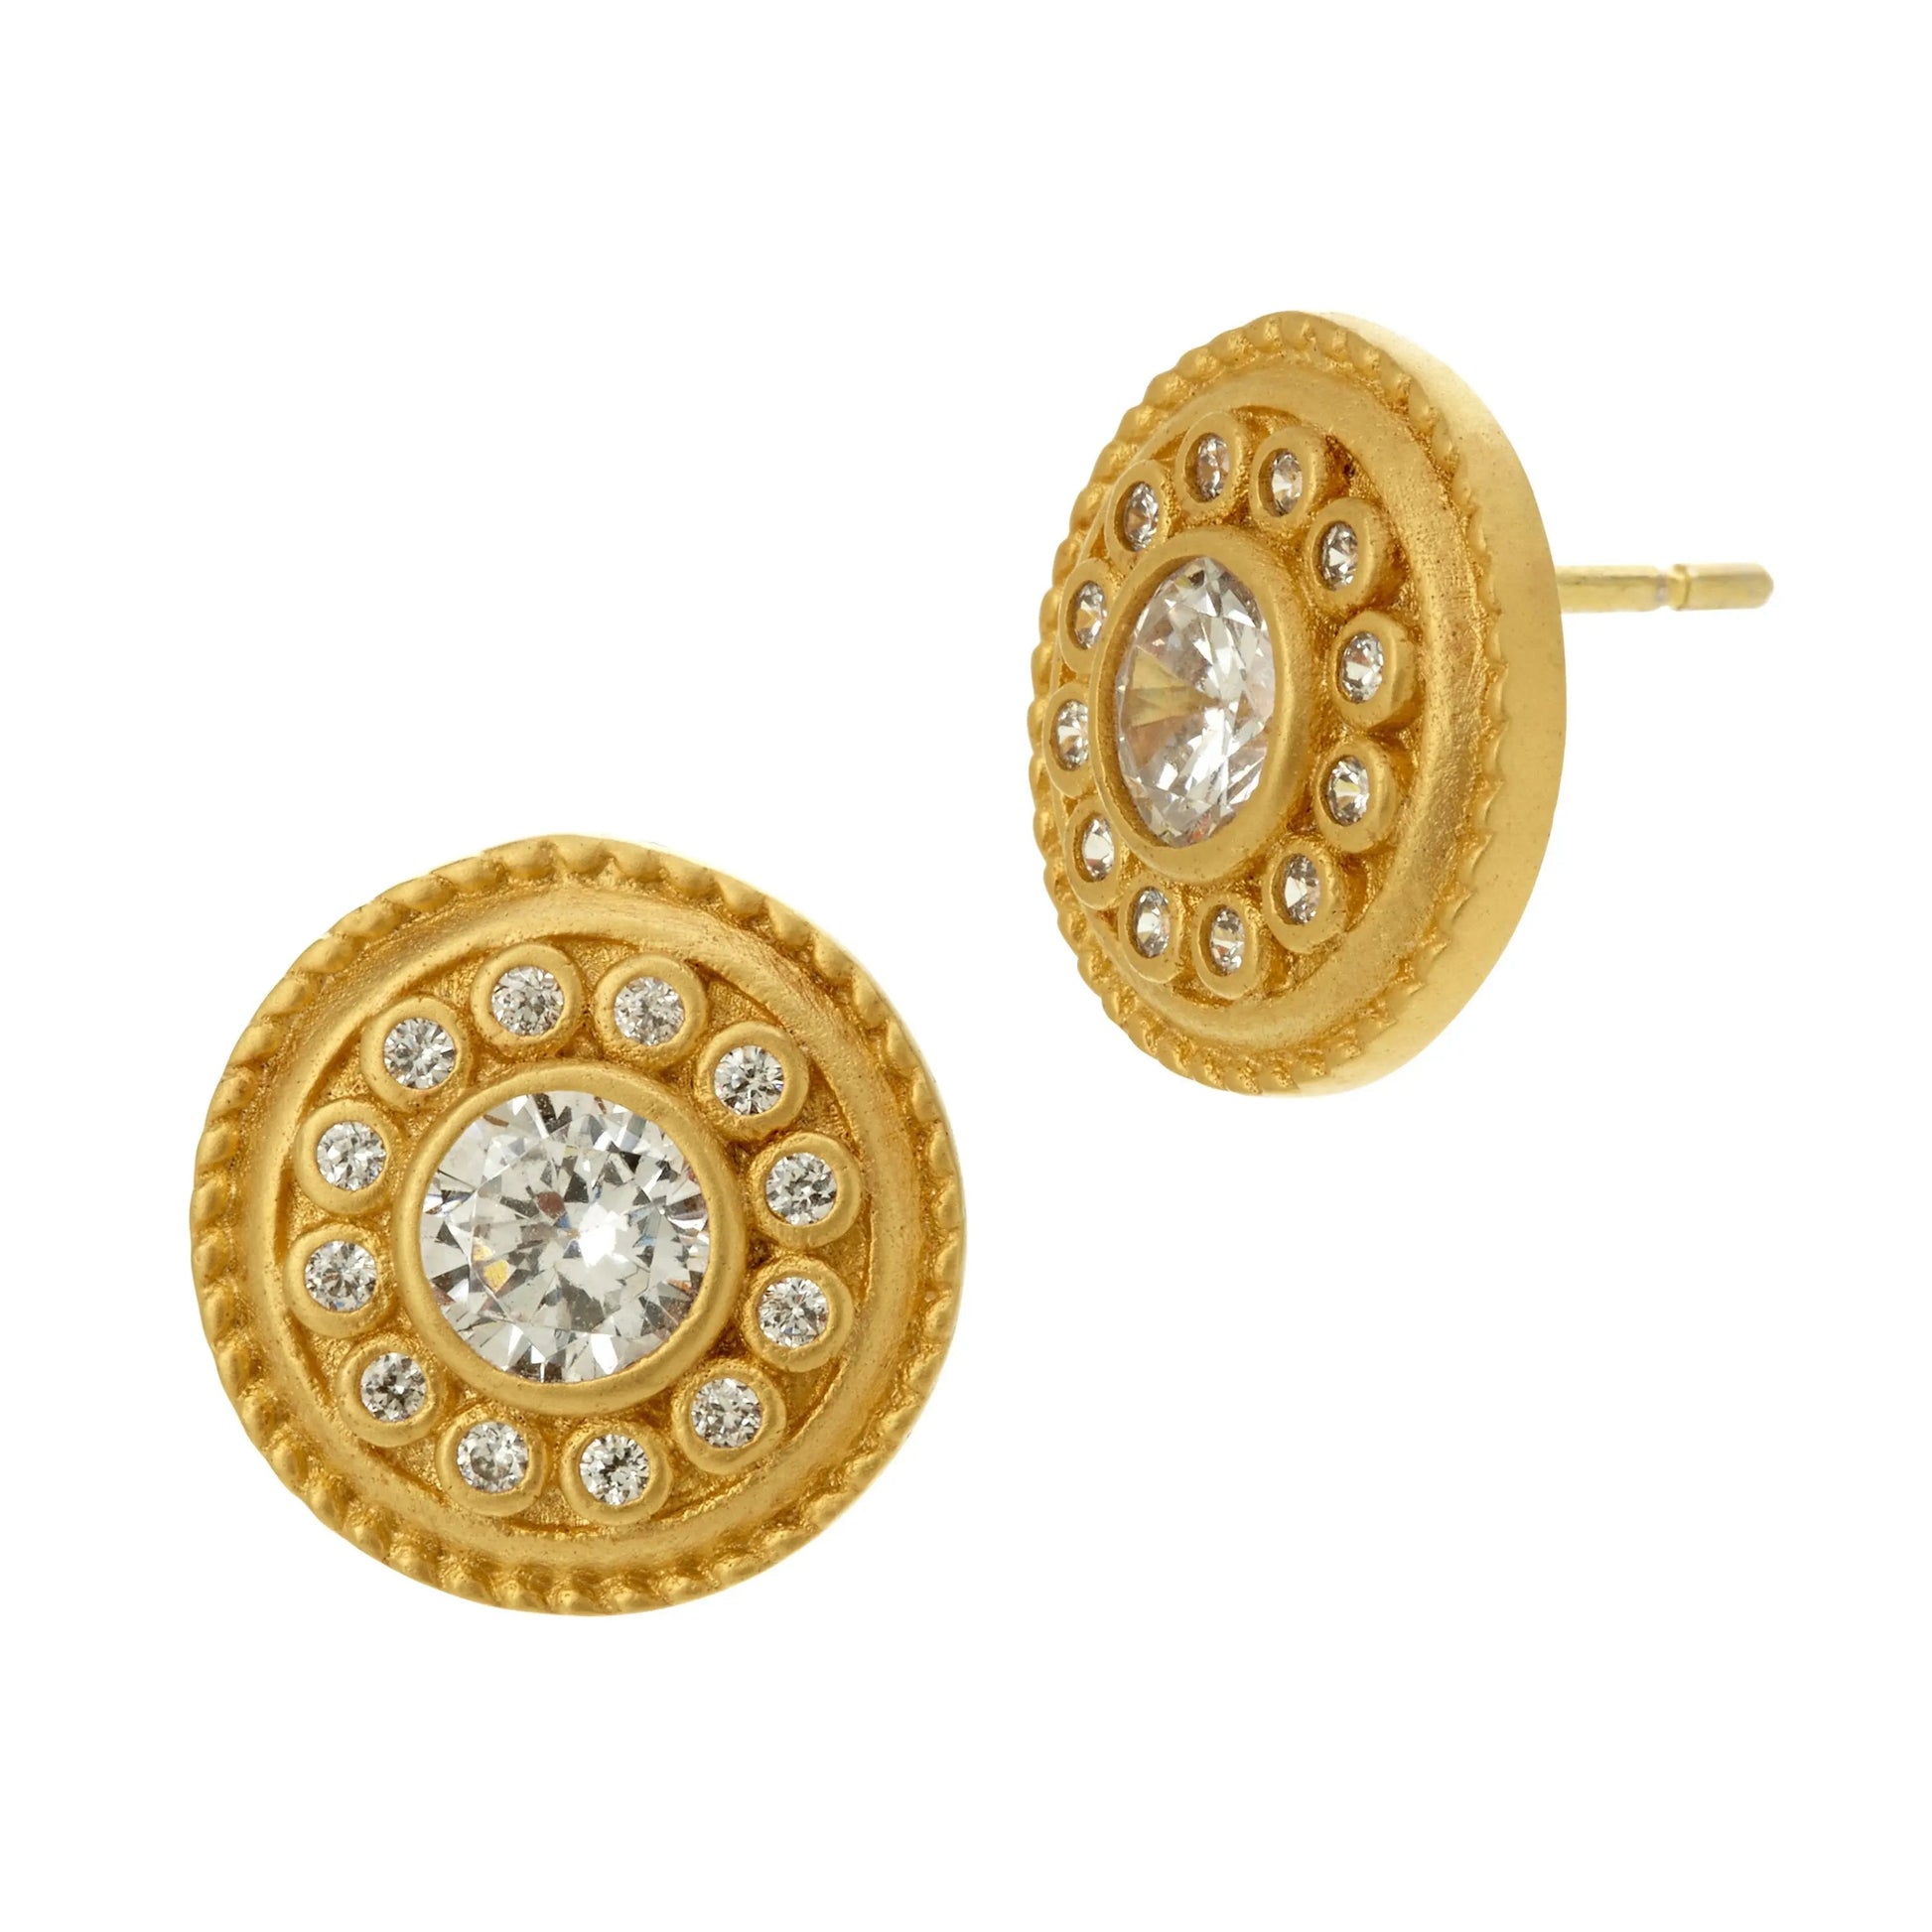 Gold Nautical Button Stud Earrings Signature EARRING